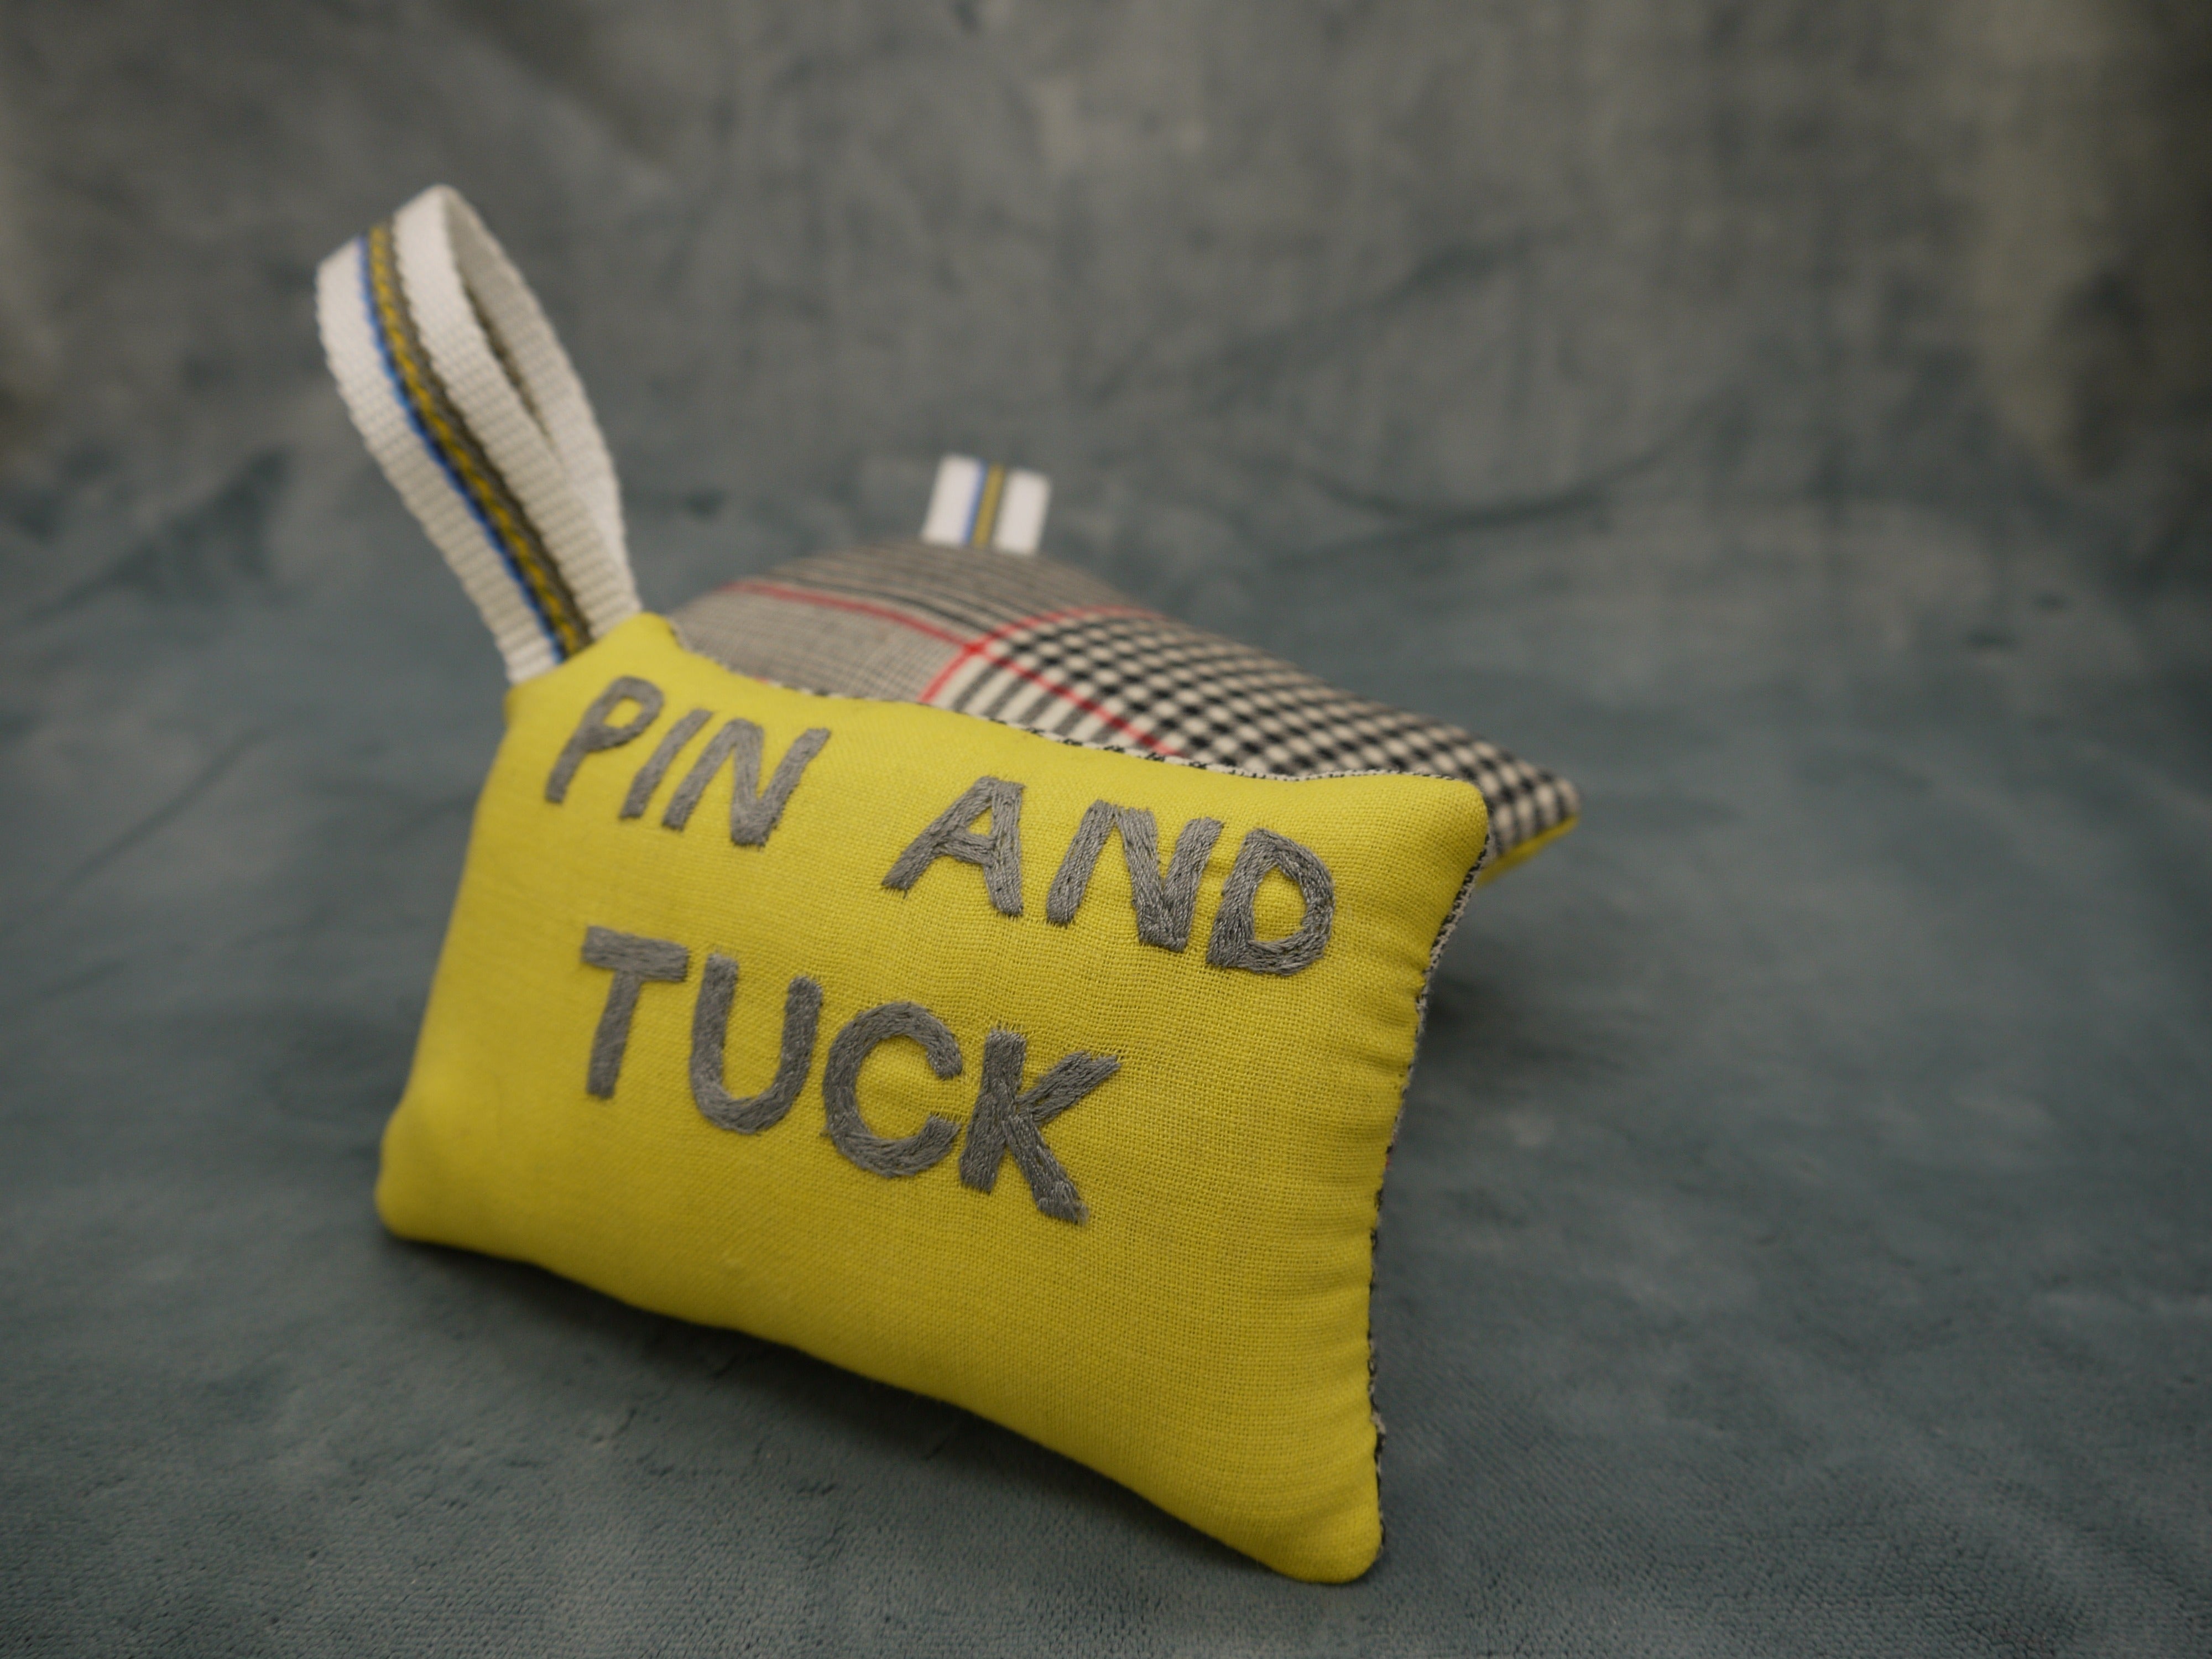 Pin cushion in yellow and grey wool, superfine 120, Pin and Tuck Embroidered by hand in grey on a yellow background, Nylon wriststrap with yellow/blue go stripe, Prince of Wales wool backing in white and black